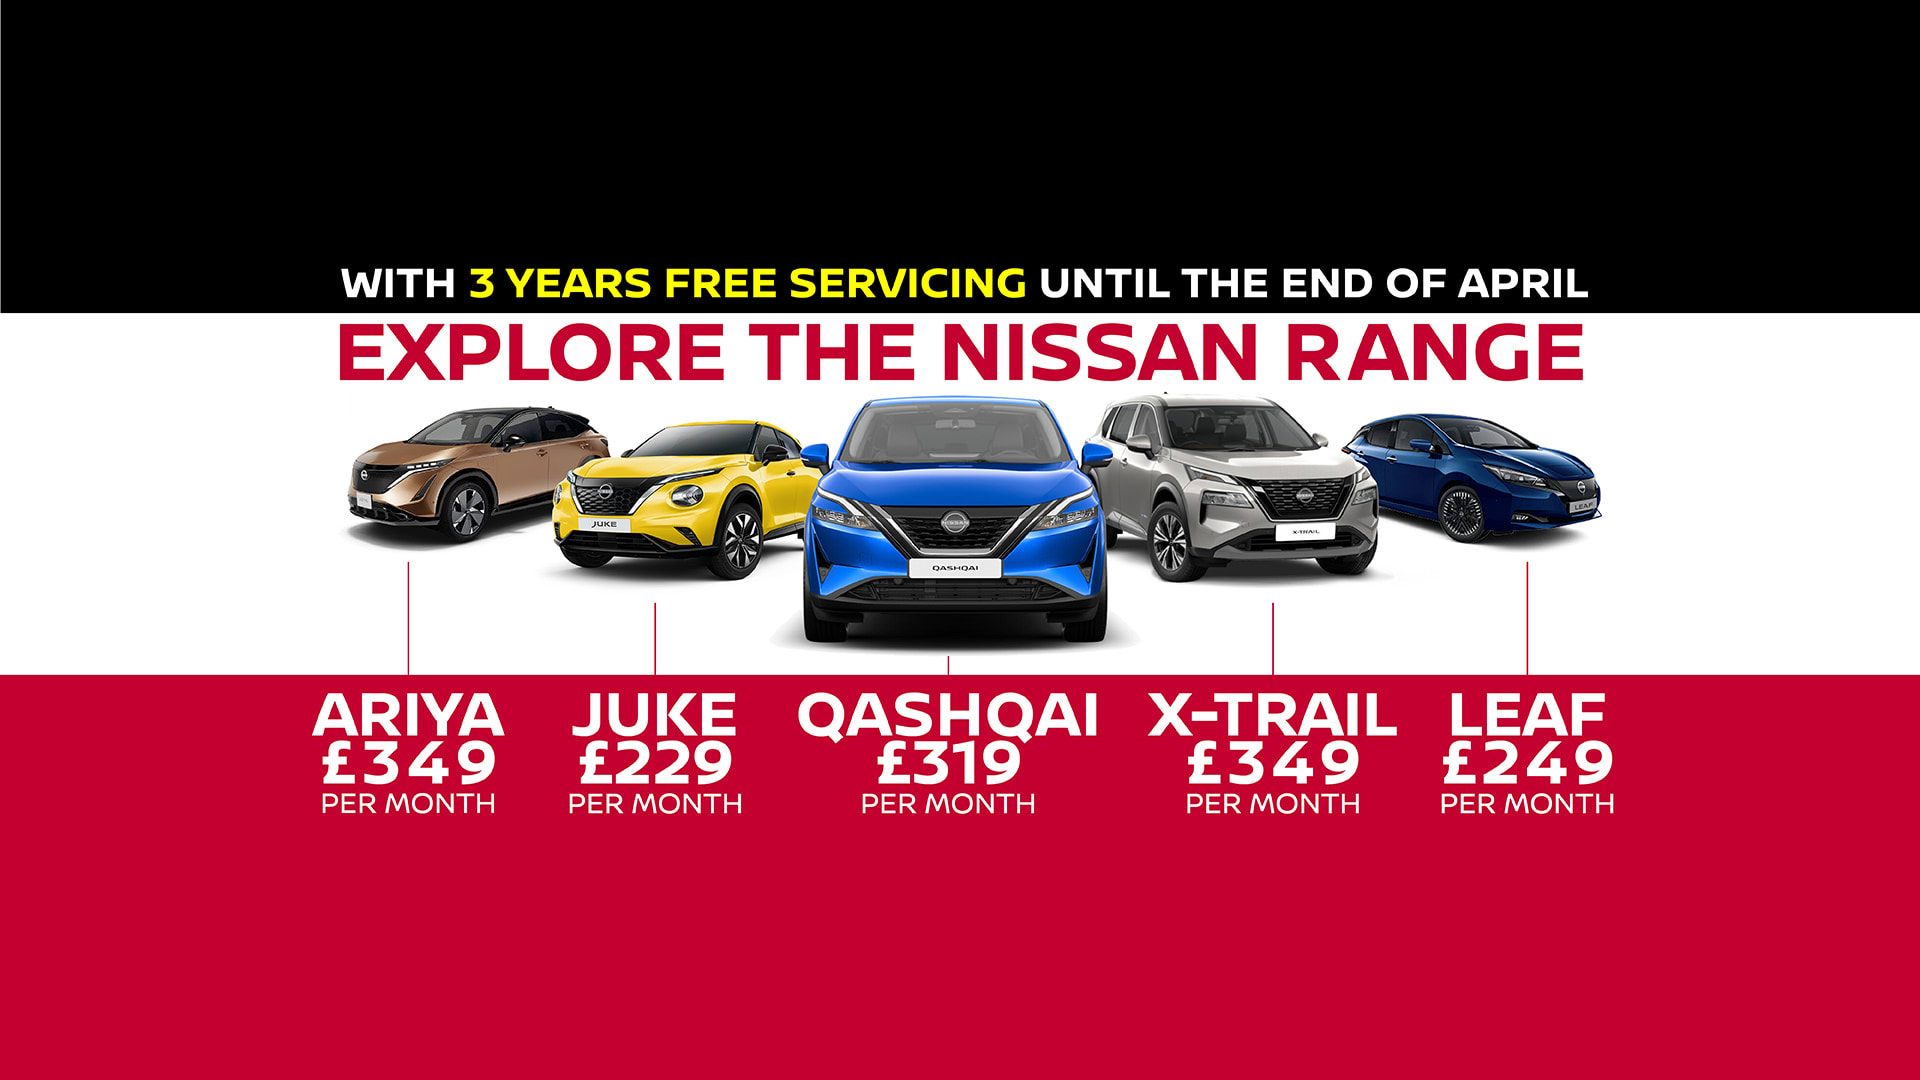 3 Years Free Servicing